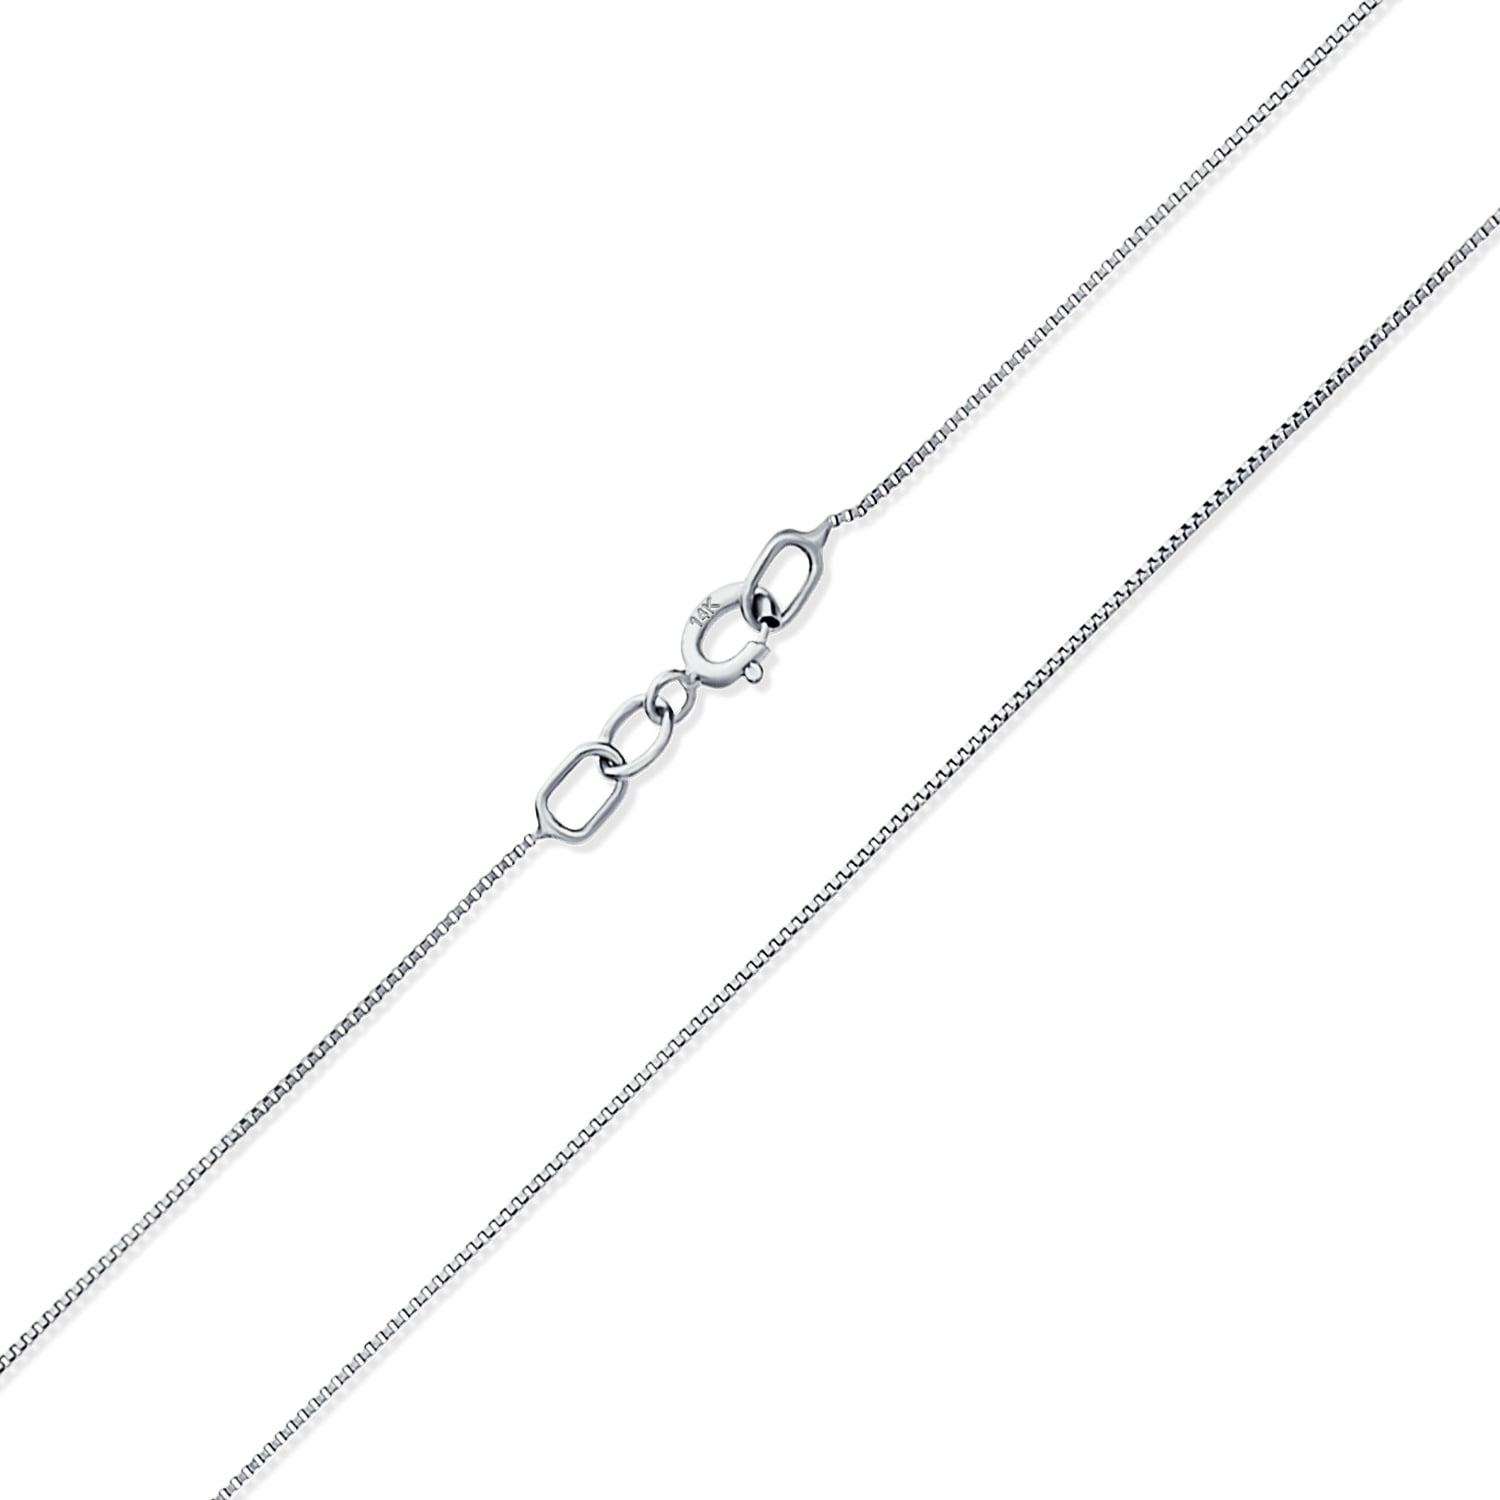 Box Necklace Solid 14k White Gold Chain Plain Square Links Polished Style Genuine 1 mm 20 inch 